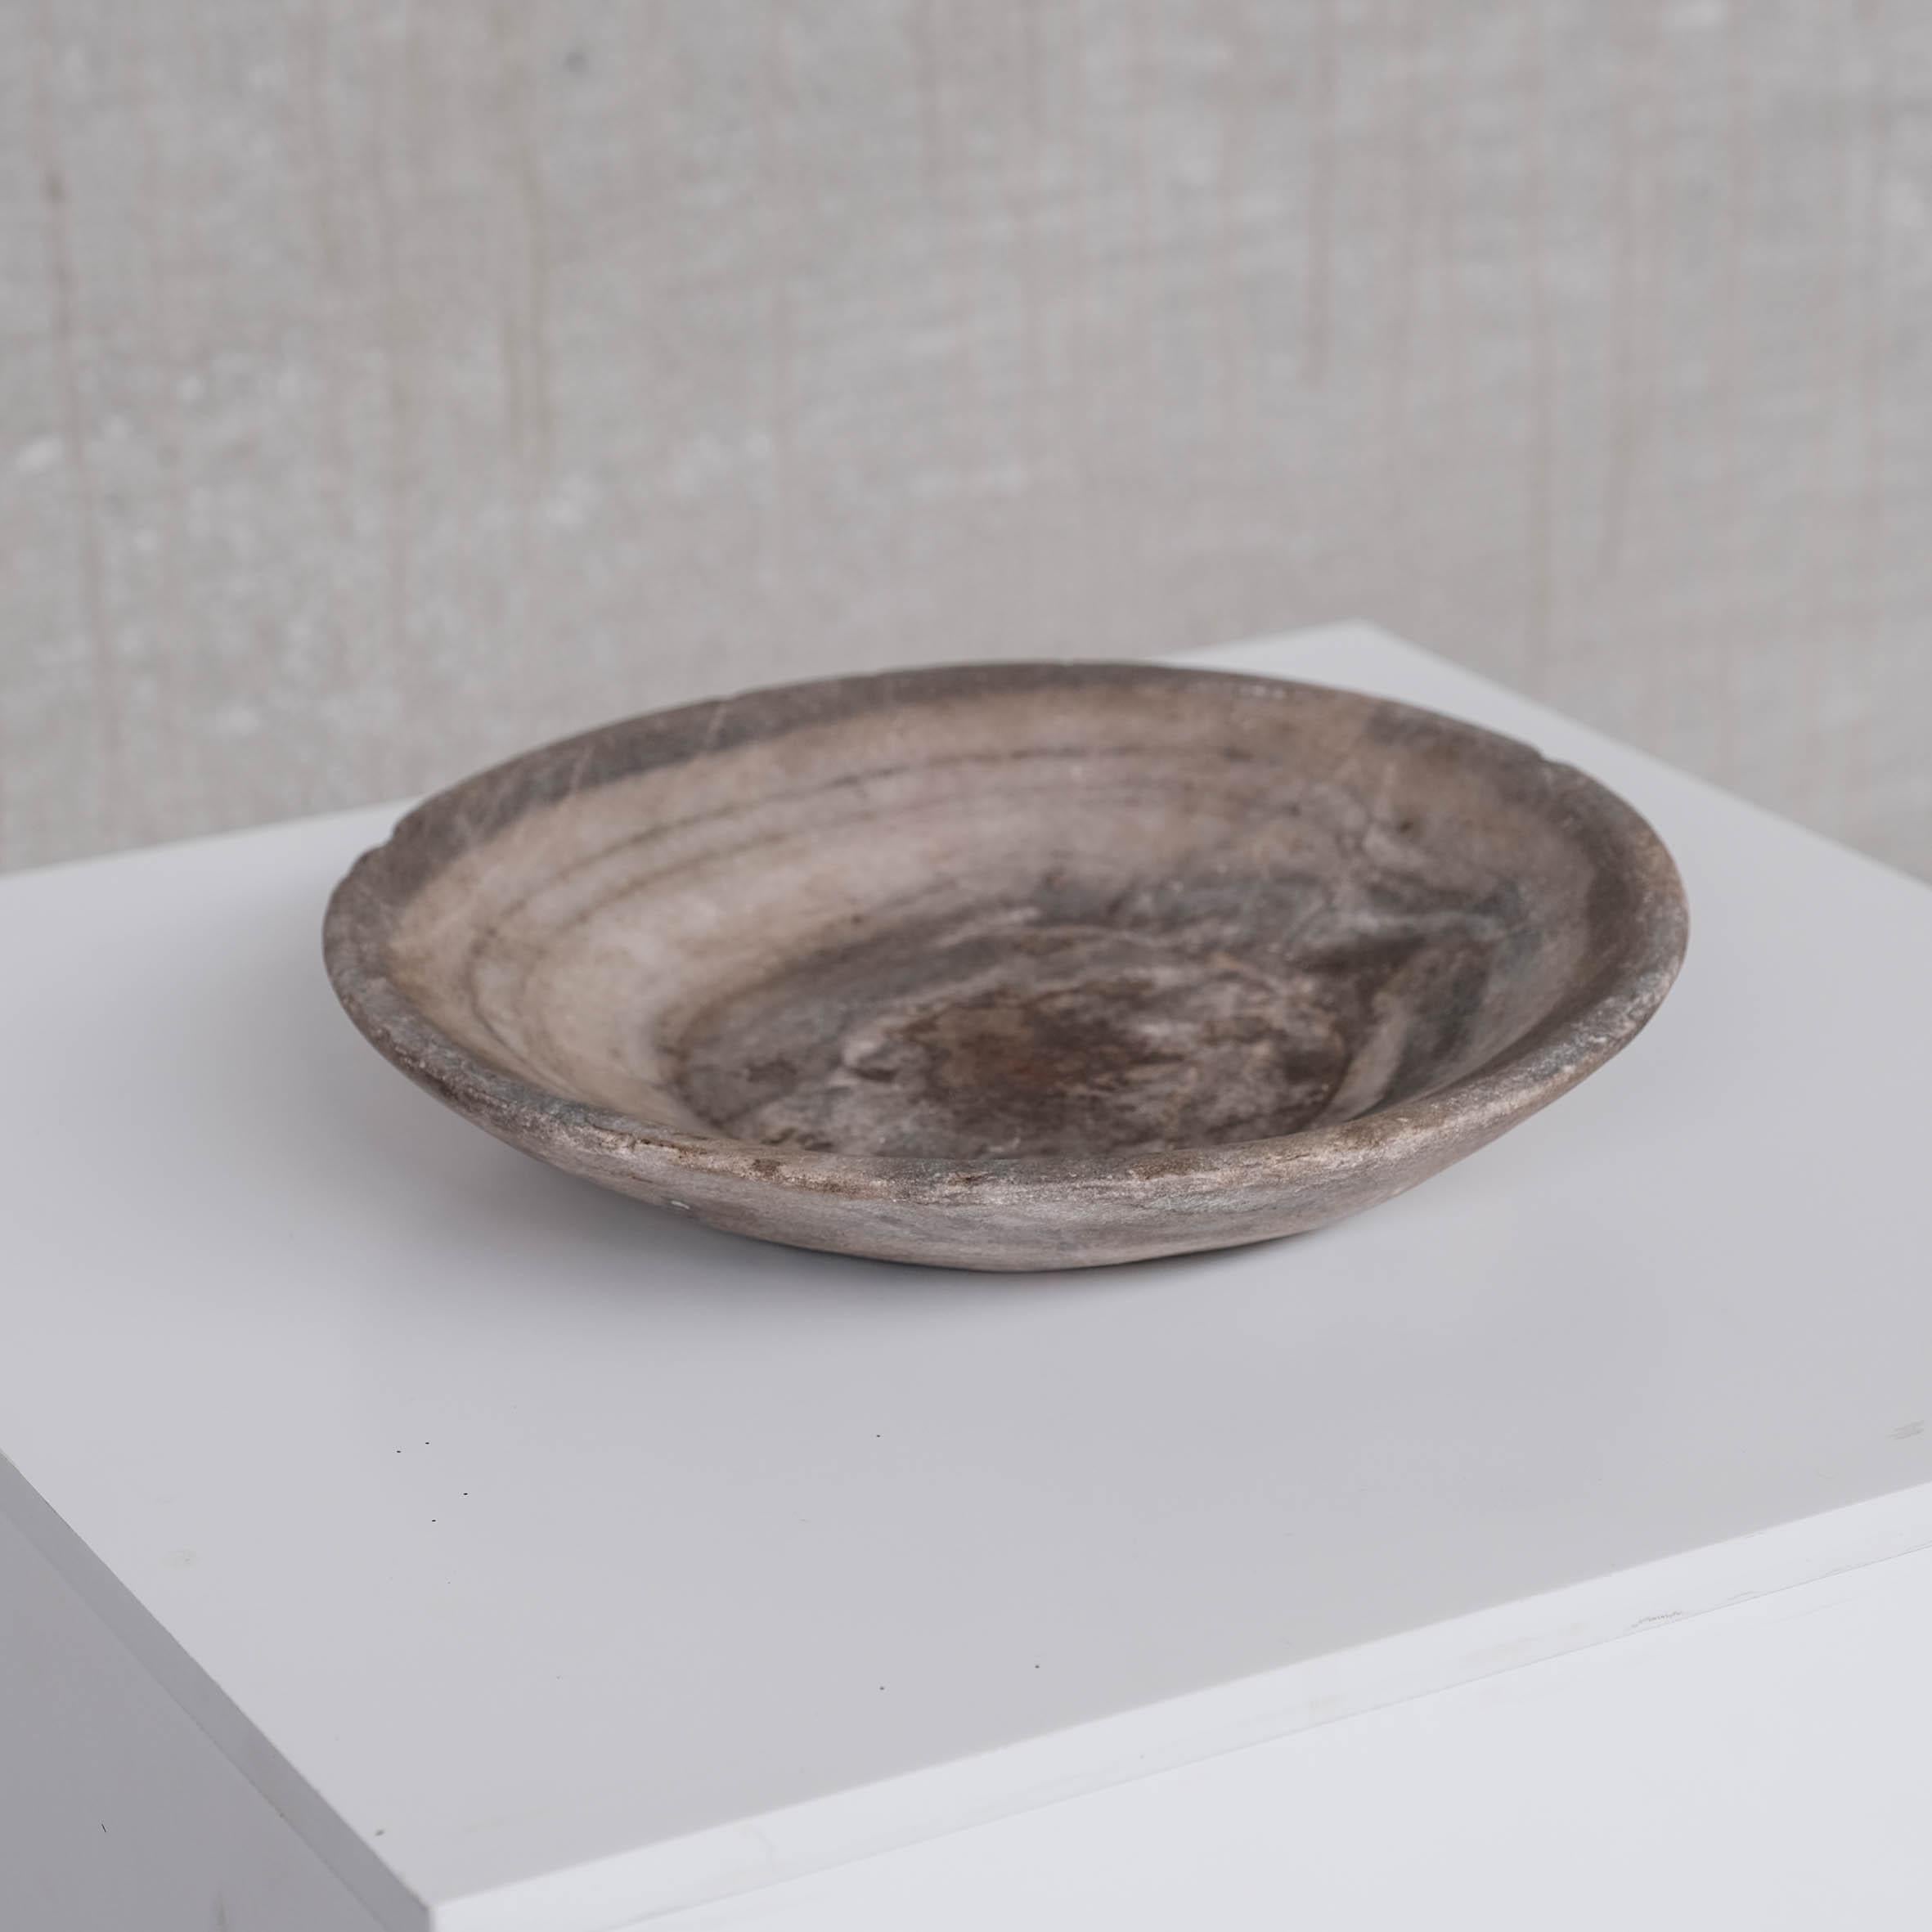 A primitive style marble or stone bowl or platter. 

Medium size. 

Nepal, c1920s. 

Good condition. 

Ideal for a wabi-sabi style. Very tactile. 

Location: Belgium Gallery. 

Dimensions: 4 height x 26 Diameter in cm. 

Delivery: